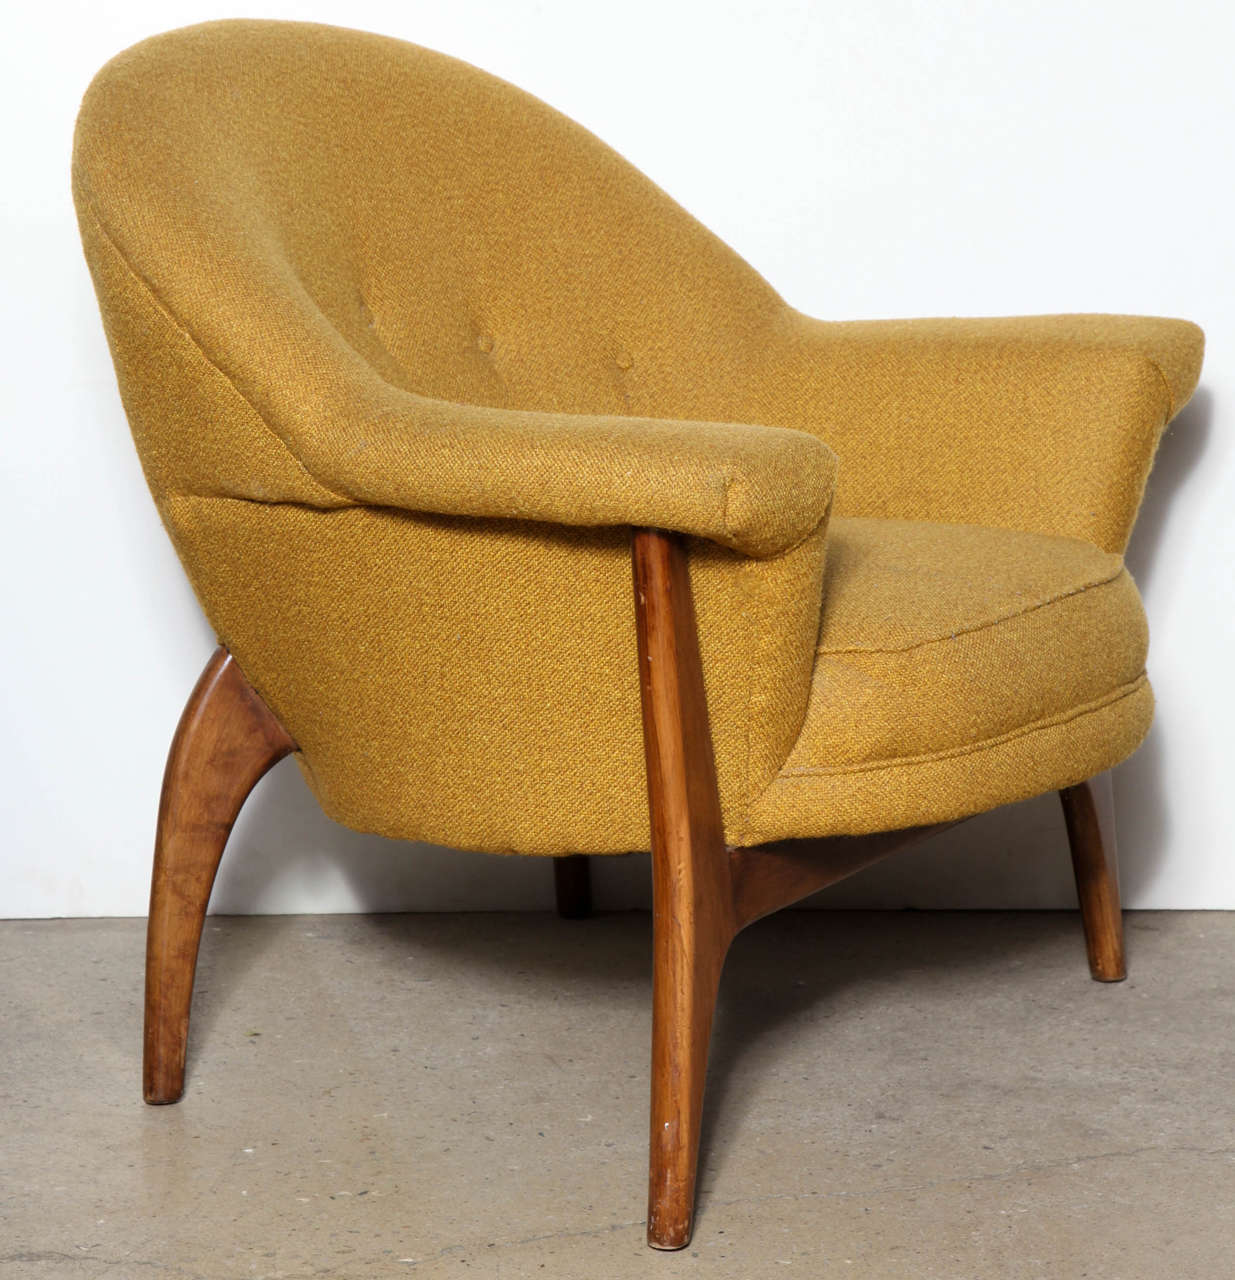 American Adrian Pearsall for Craft Associates Lounge Chair